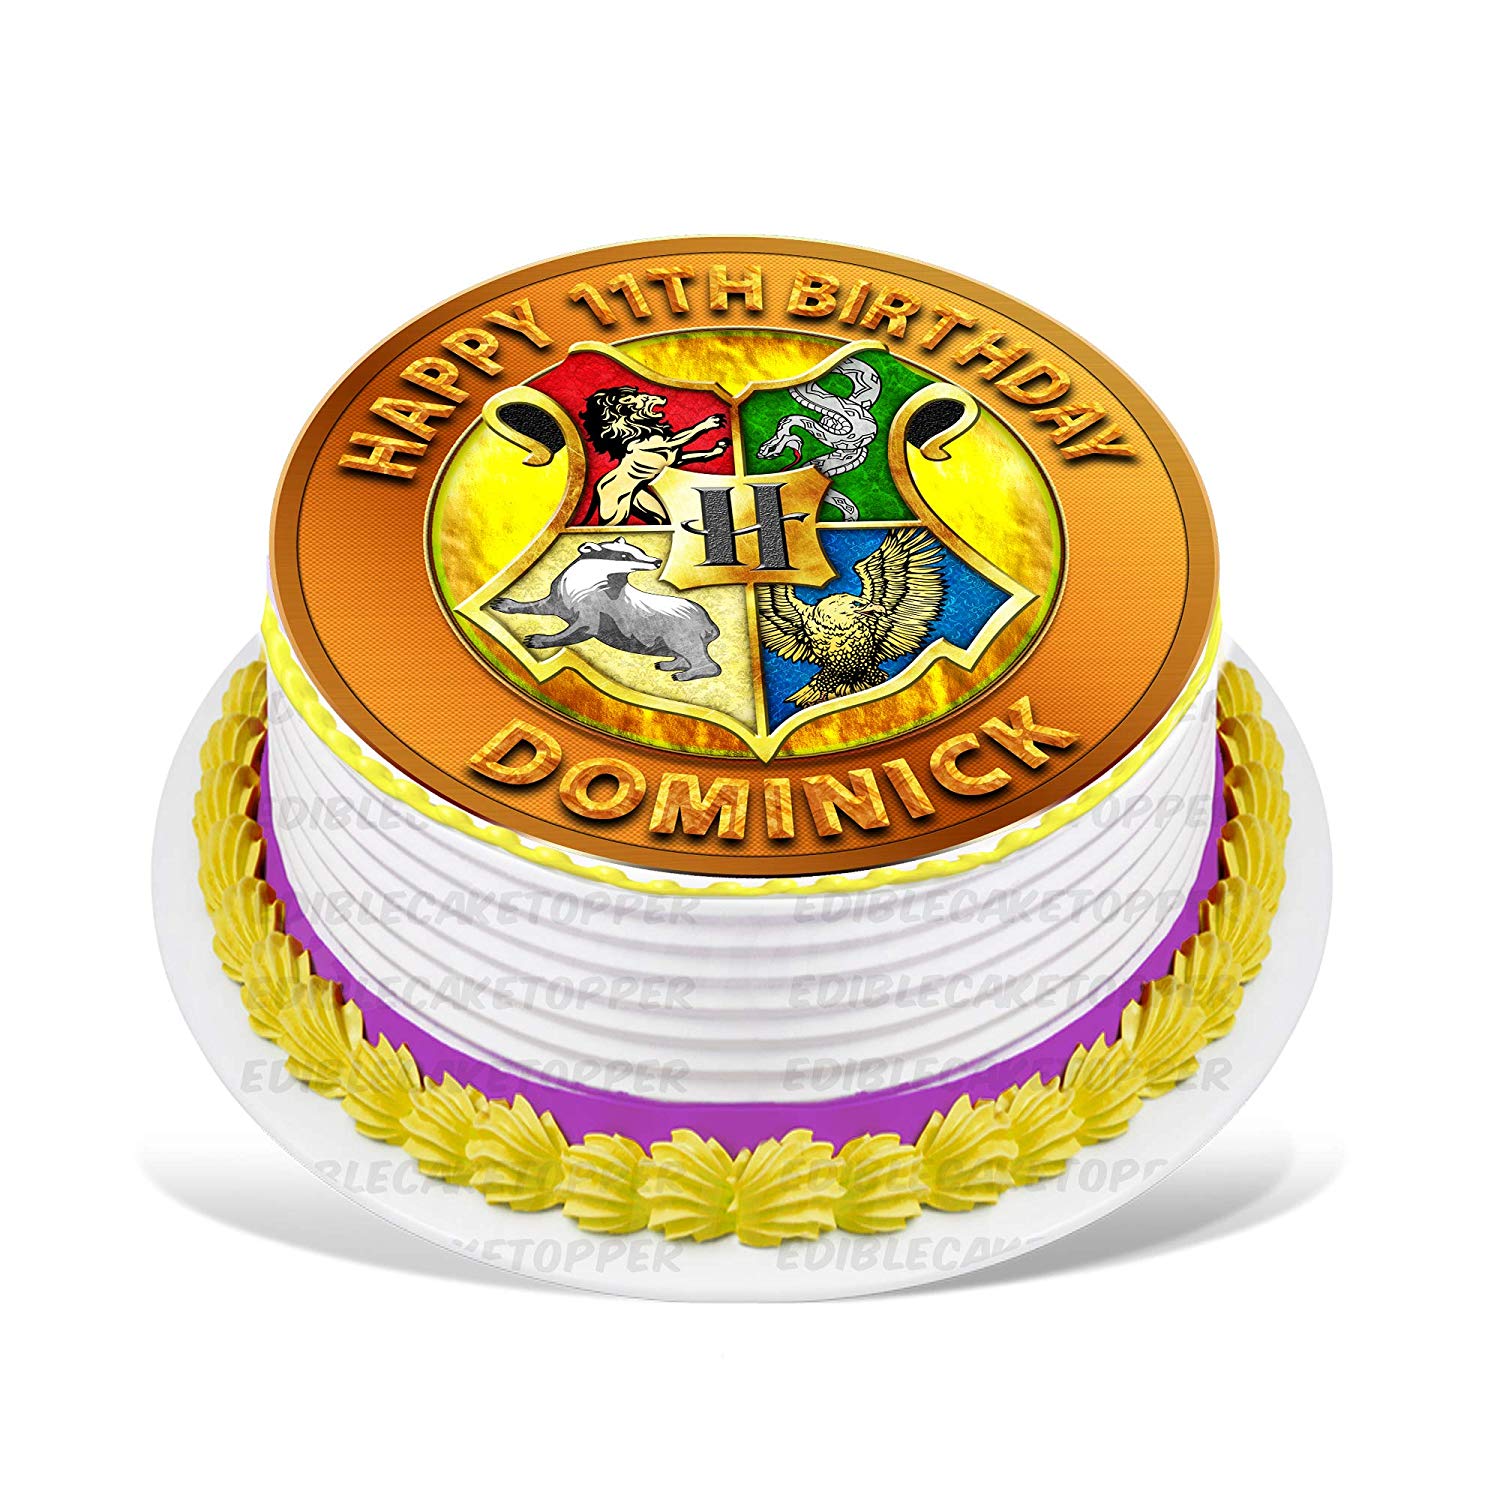 HARRY POTTER HOGWARTS CAKE TOPPER ROUND PERSONALISED EDIBLE ICING CAKE DEC